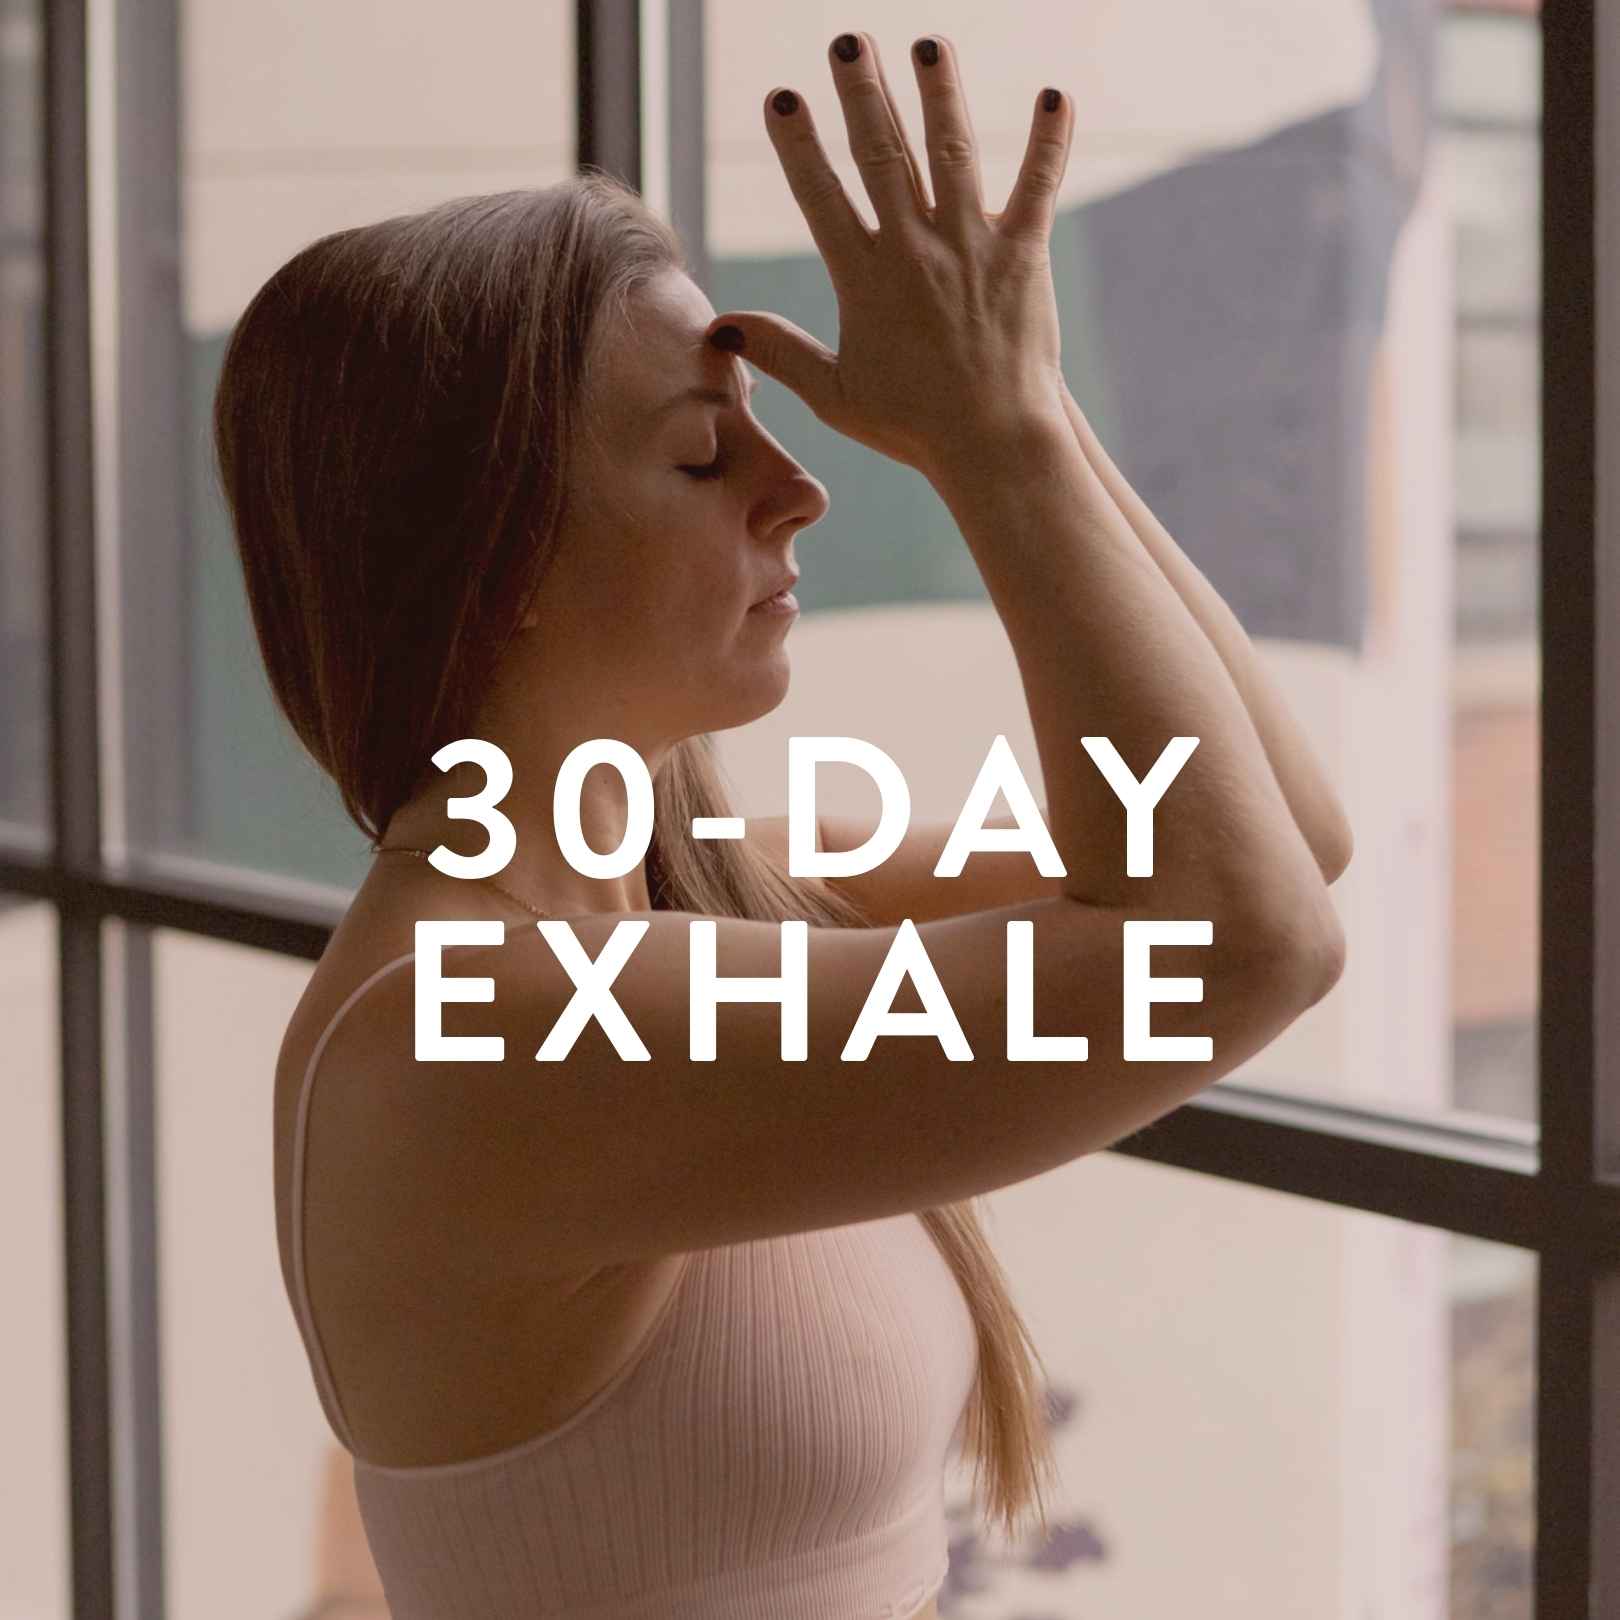 30-Day Exhale